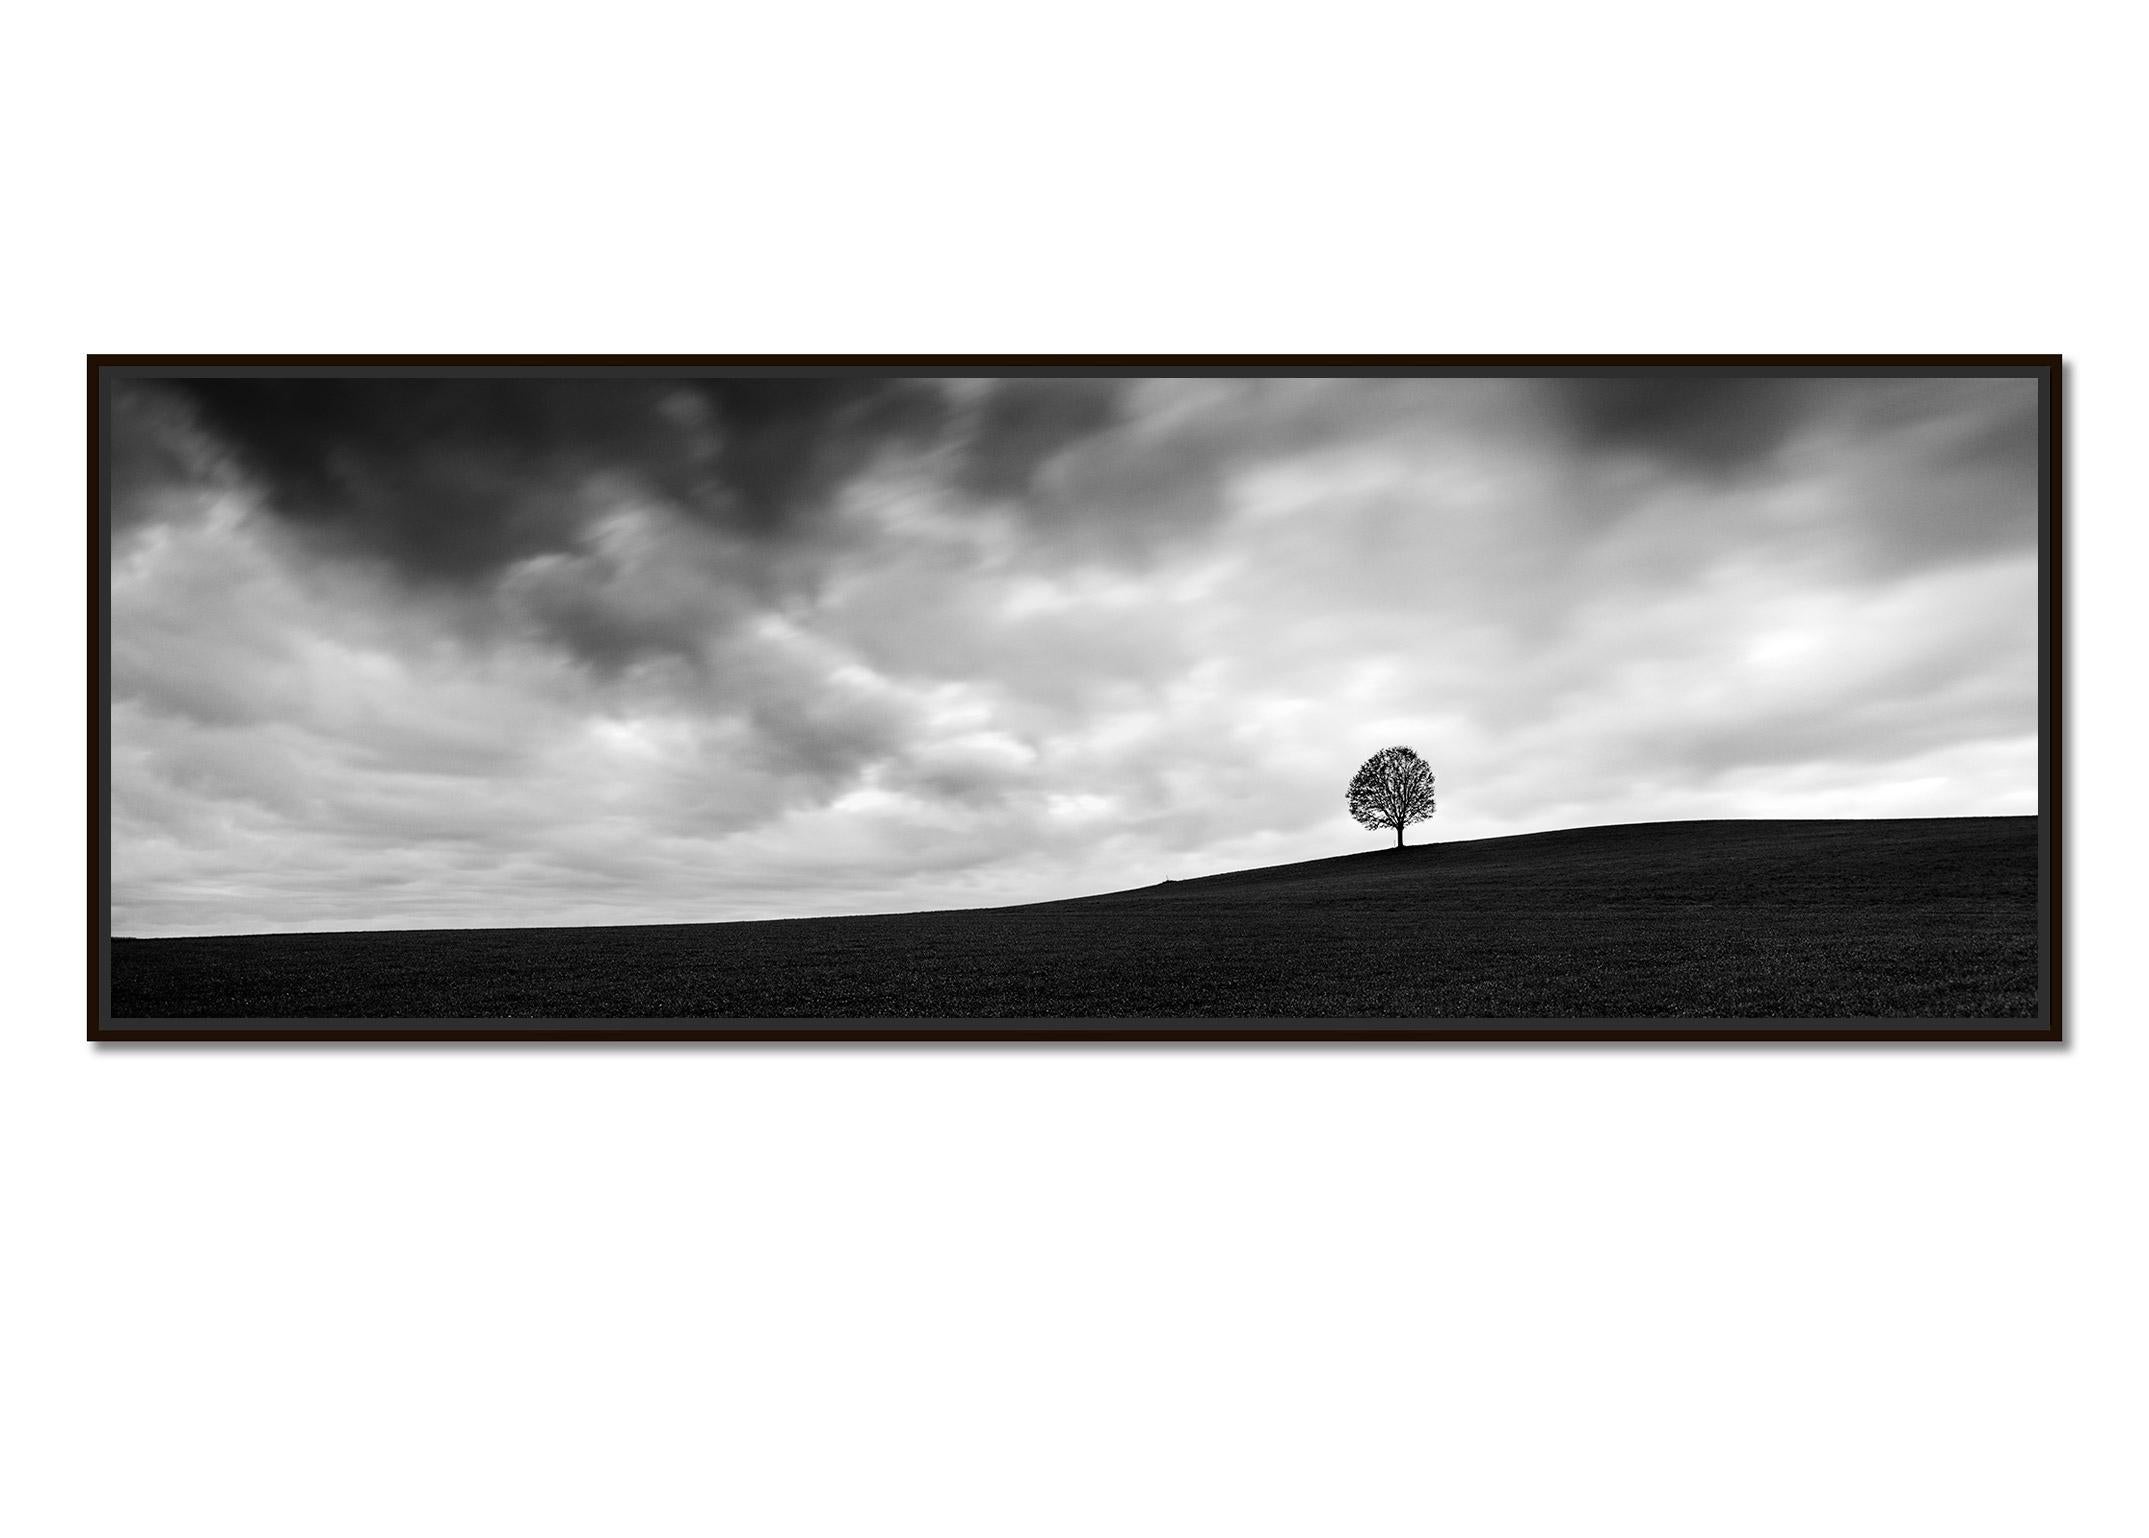 Turbulent Times, single tree panorama, black and white landscape art photography - Photograph by Gerald Berghammer